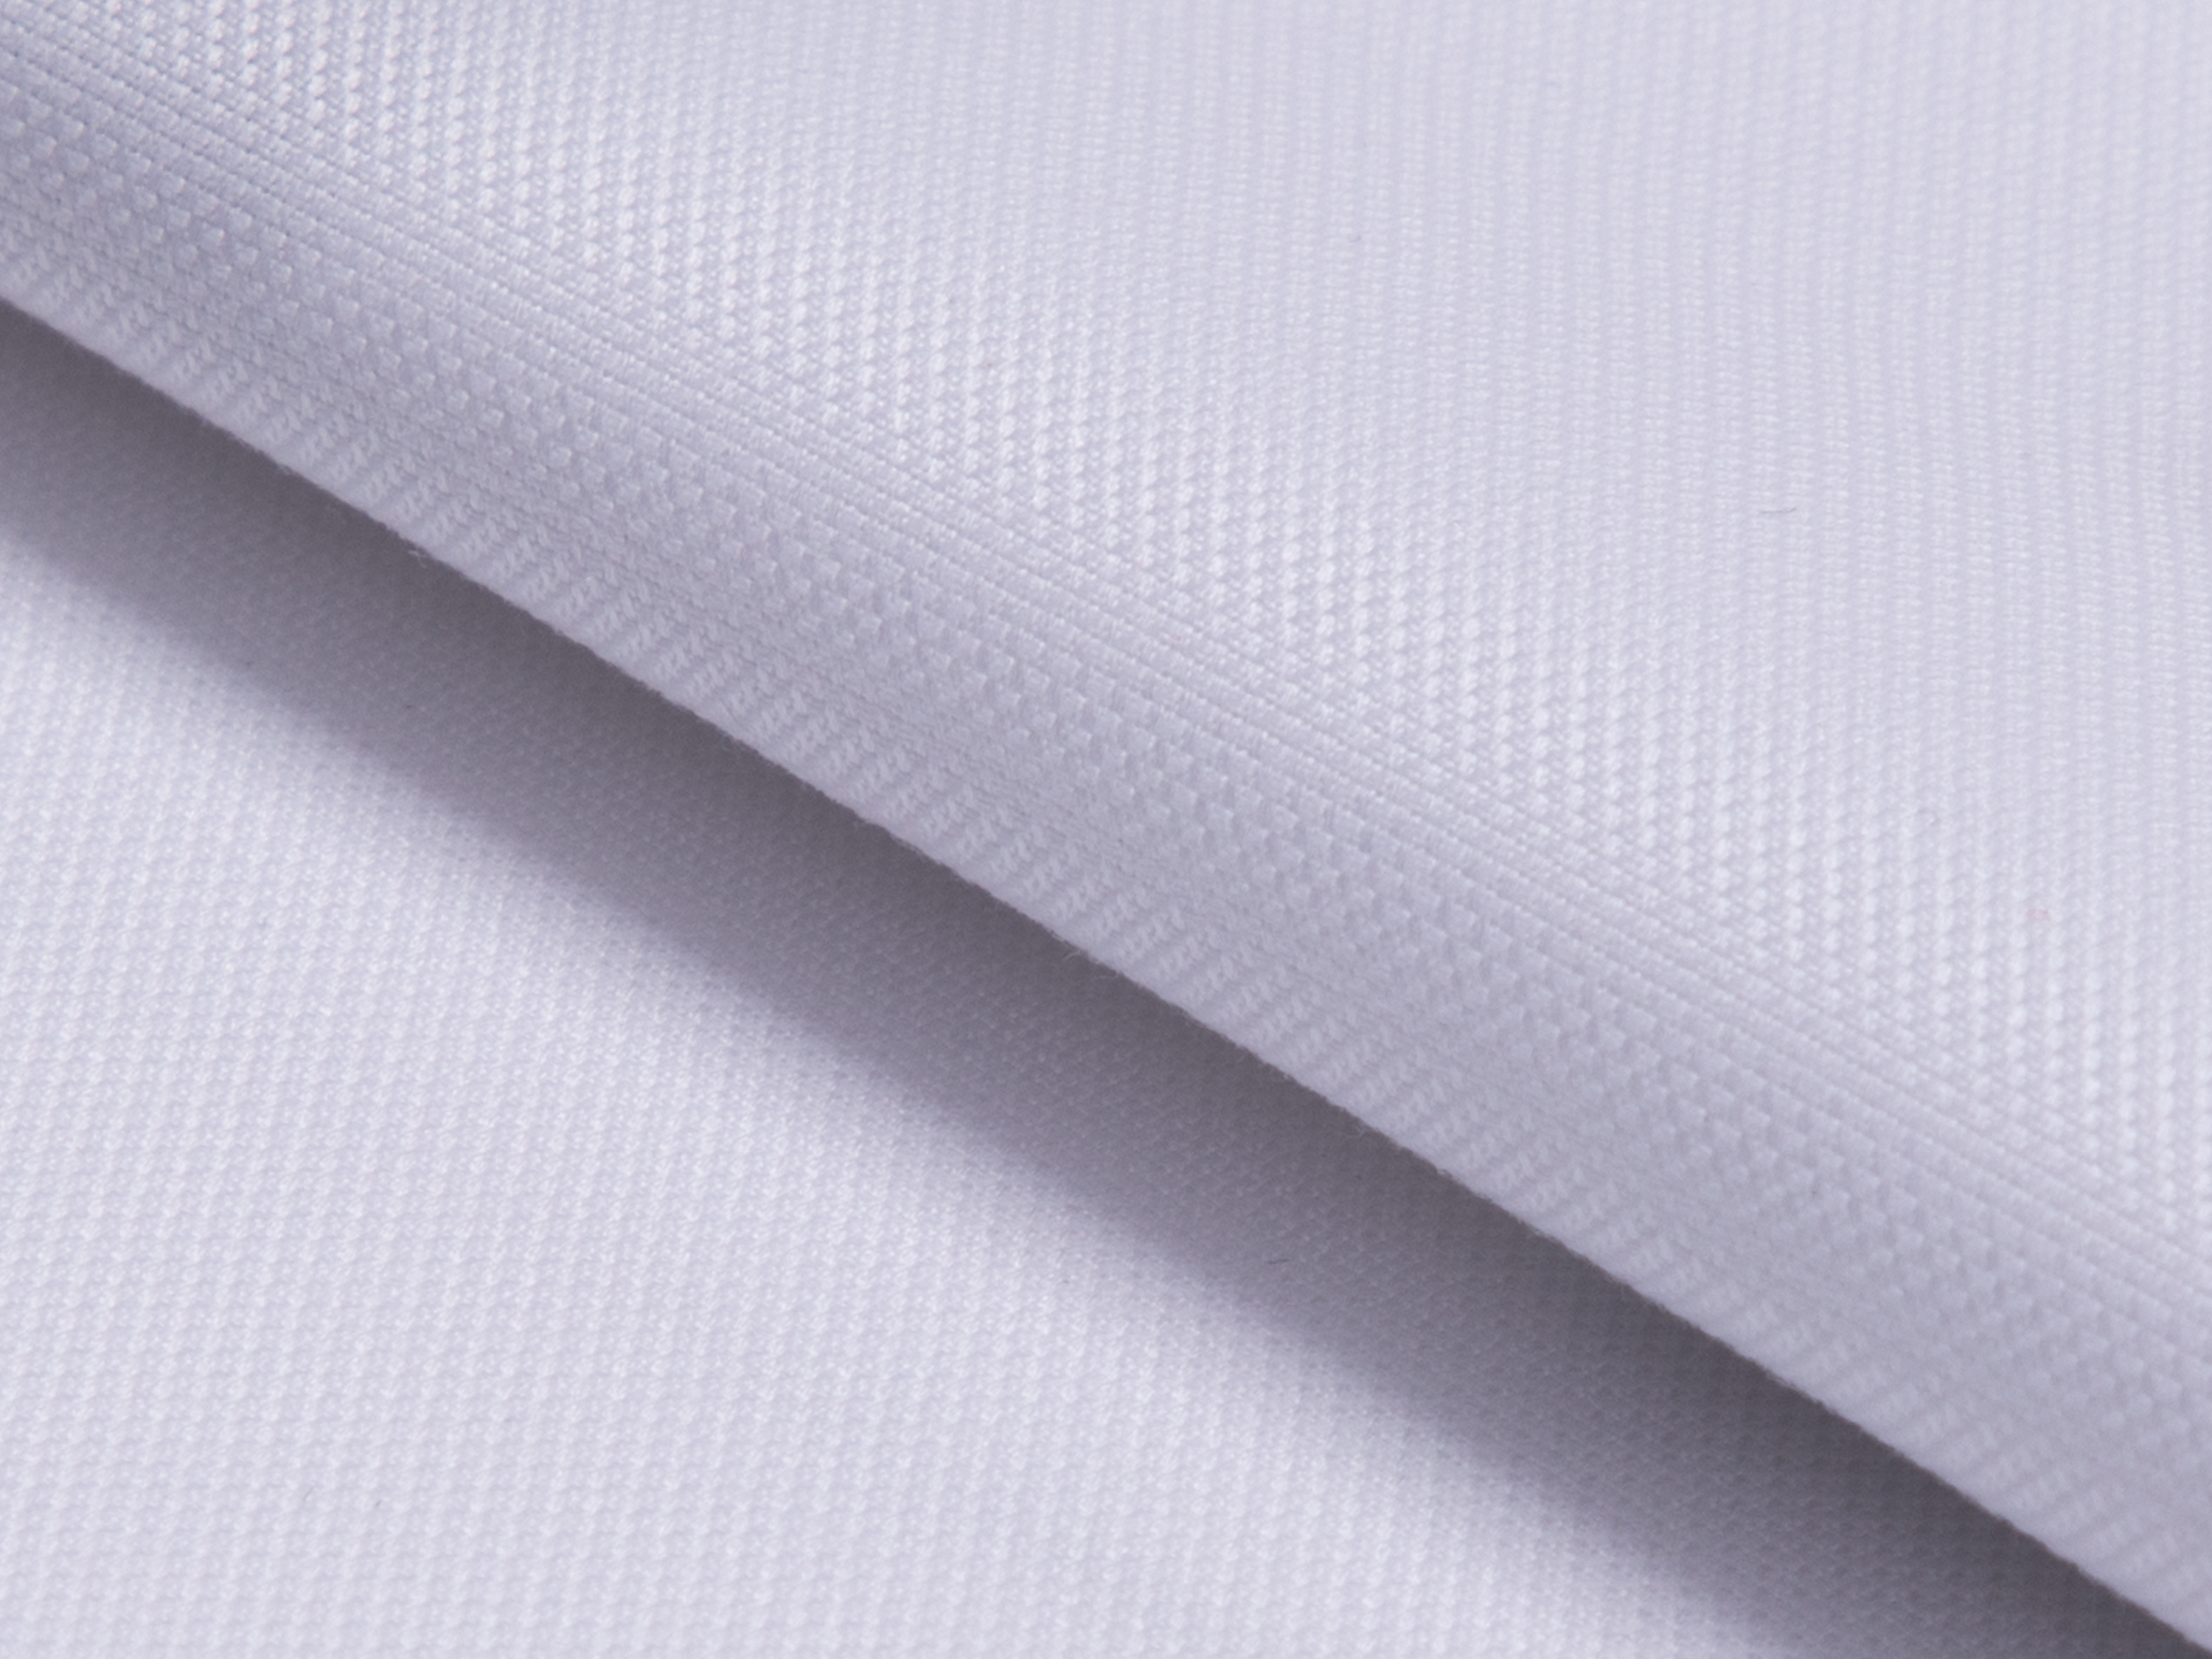 Buy tailor made shirts online - MAYFAIR - Pinpoint White